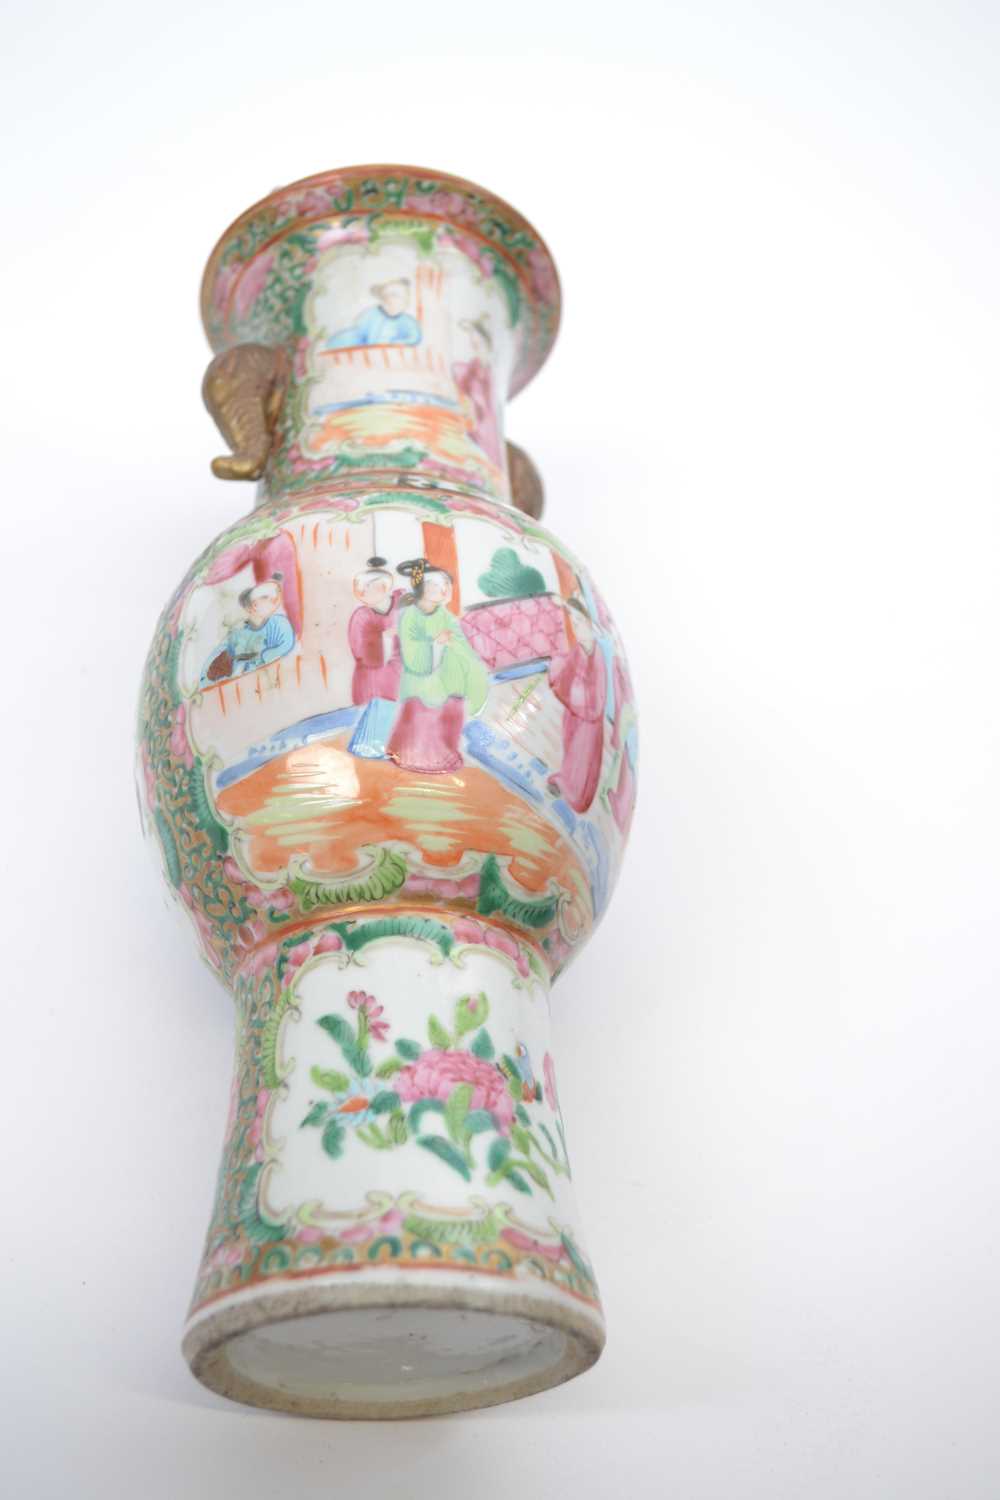 Cantonese porcelain vase decorated with polychrome designs of Chinese figures in typical settings, - Image 2 of 2